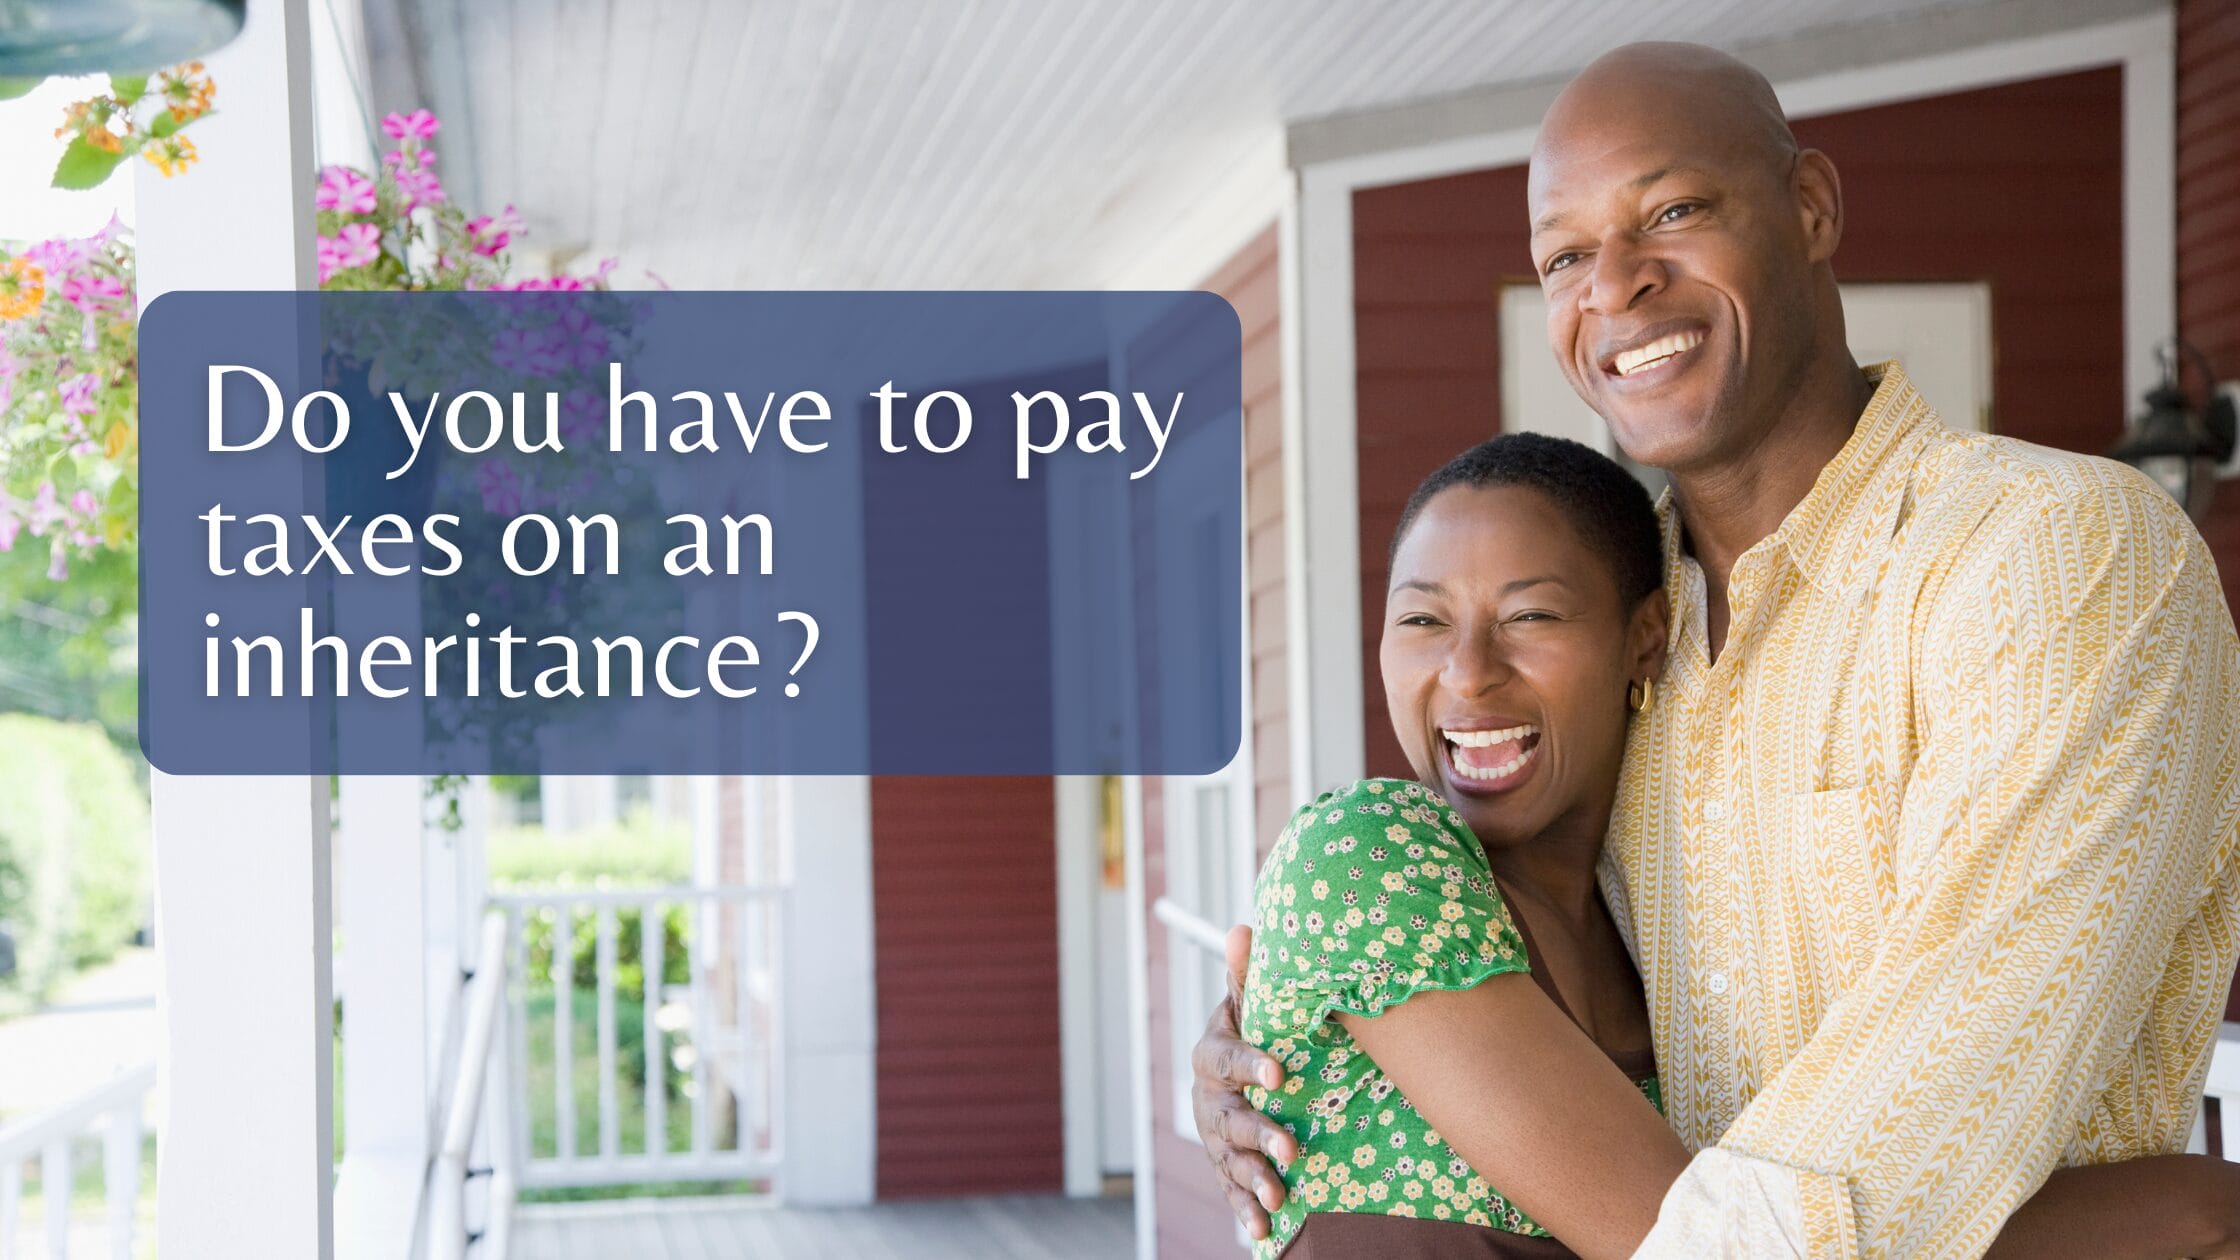 Do you have to pay taxes on an inheritance?